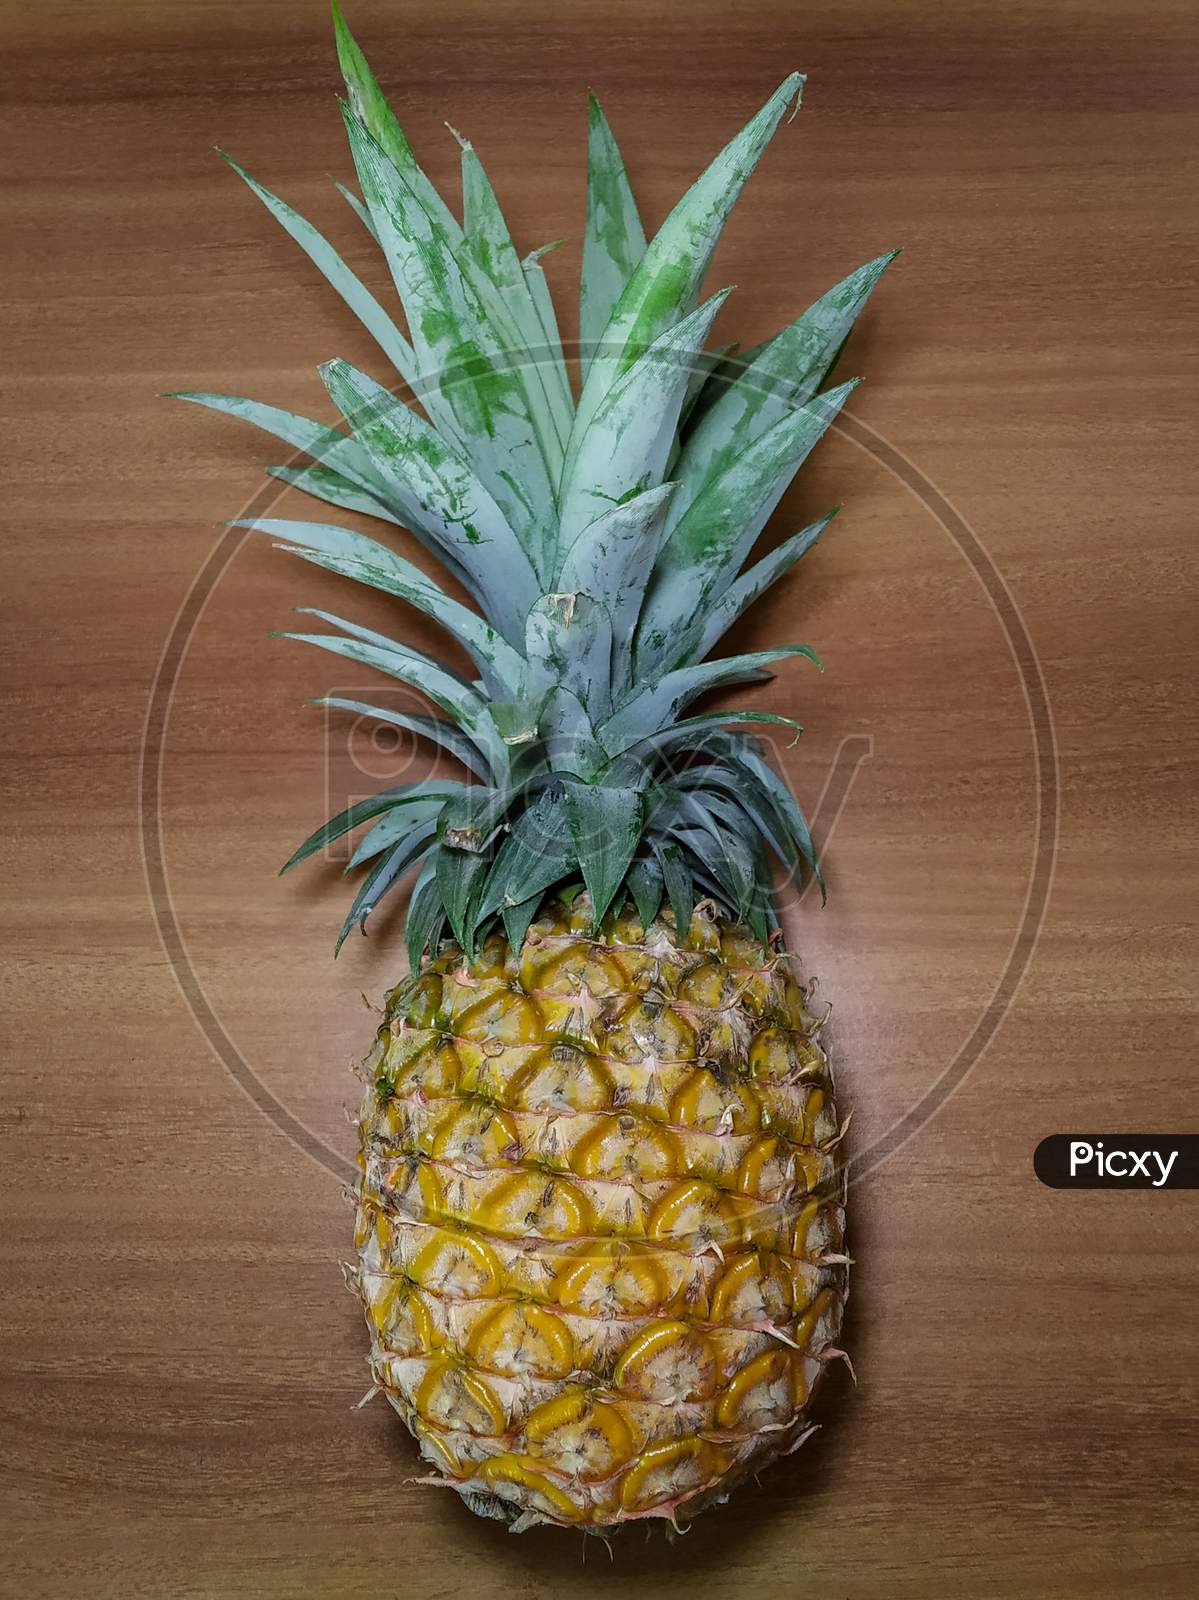 Ripe Pineapple on wooden surface